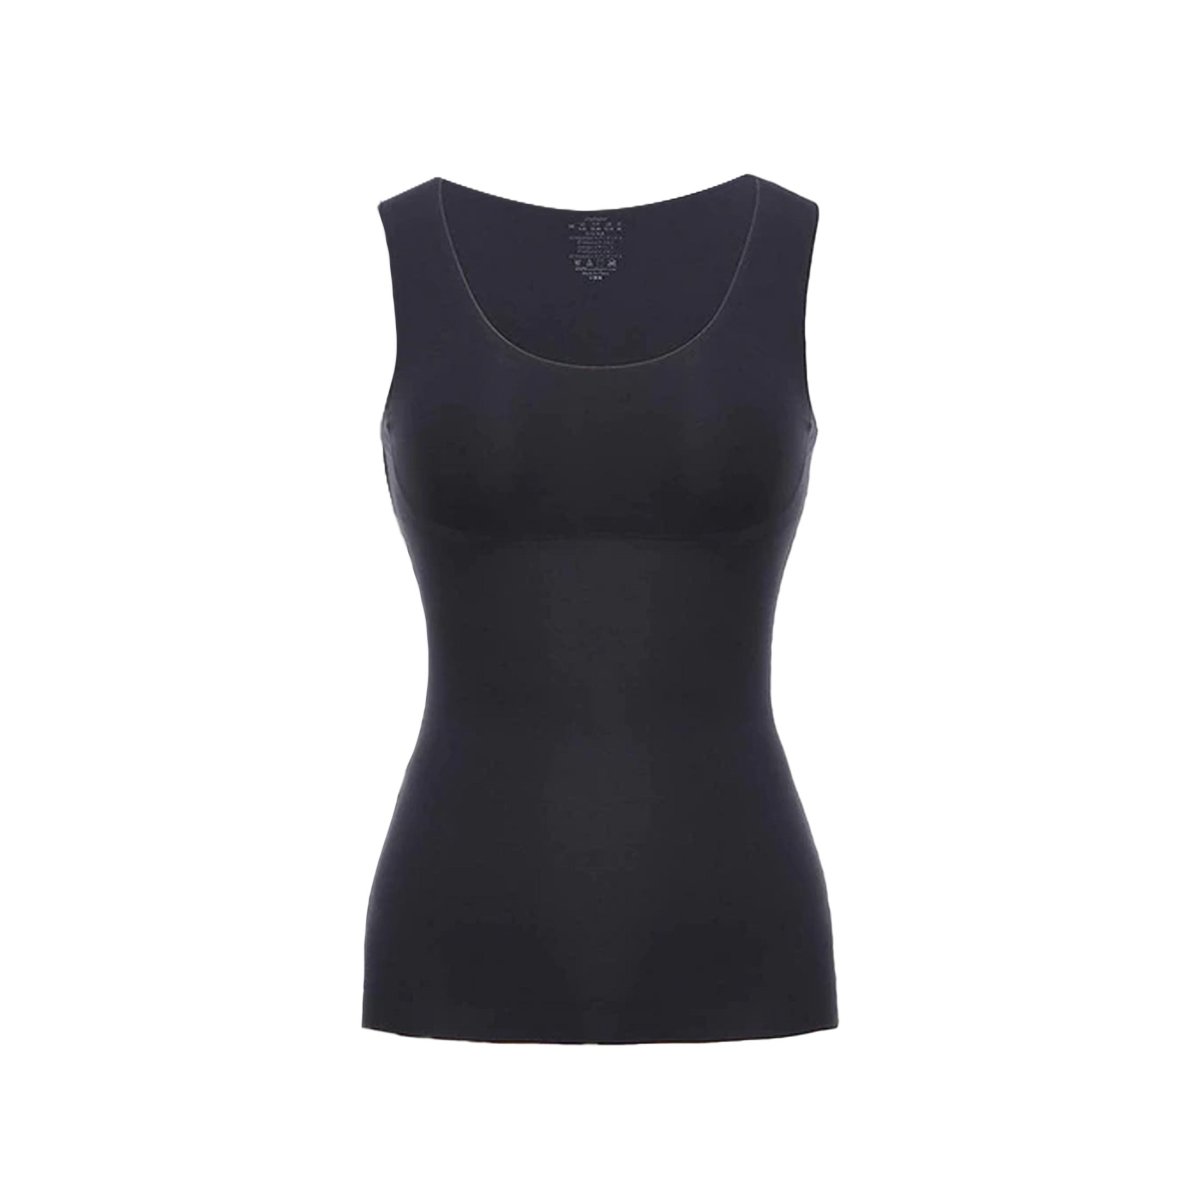 Body Smoothing See Through Camisole For Support And Flair 